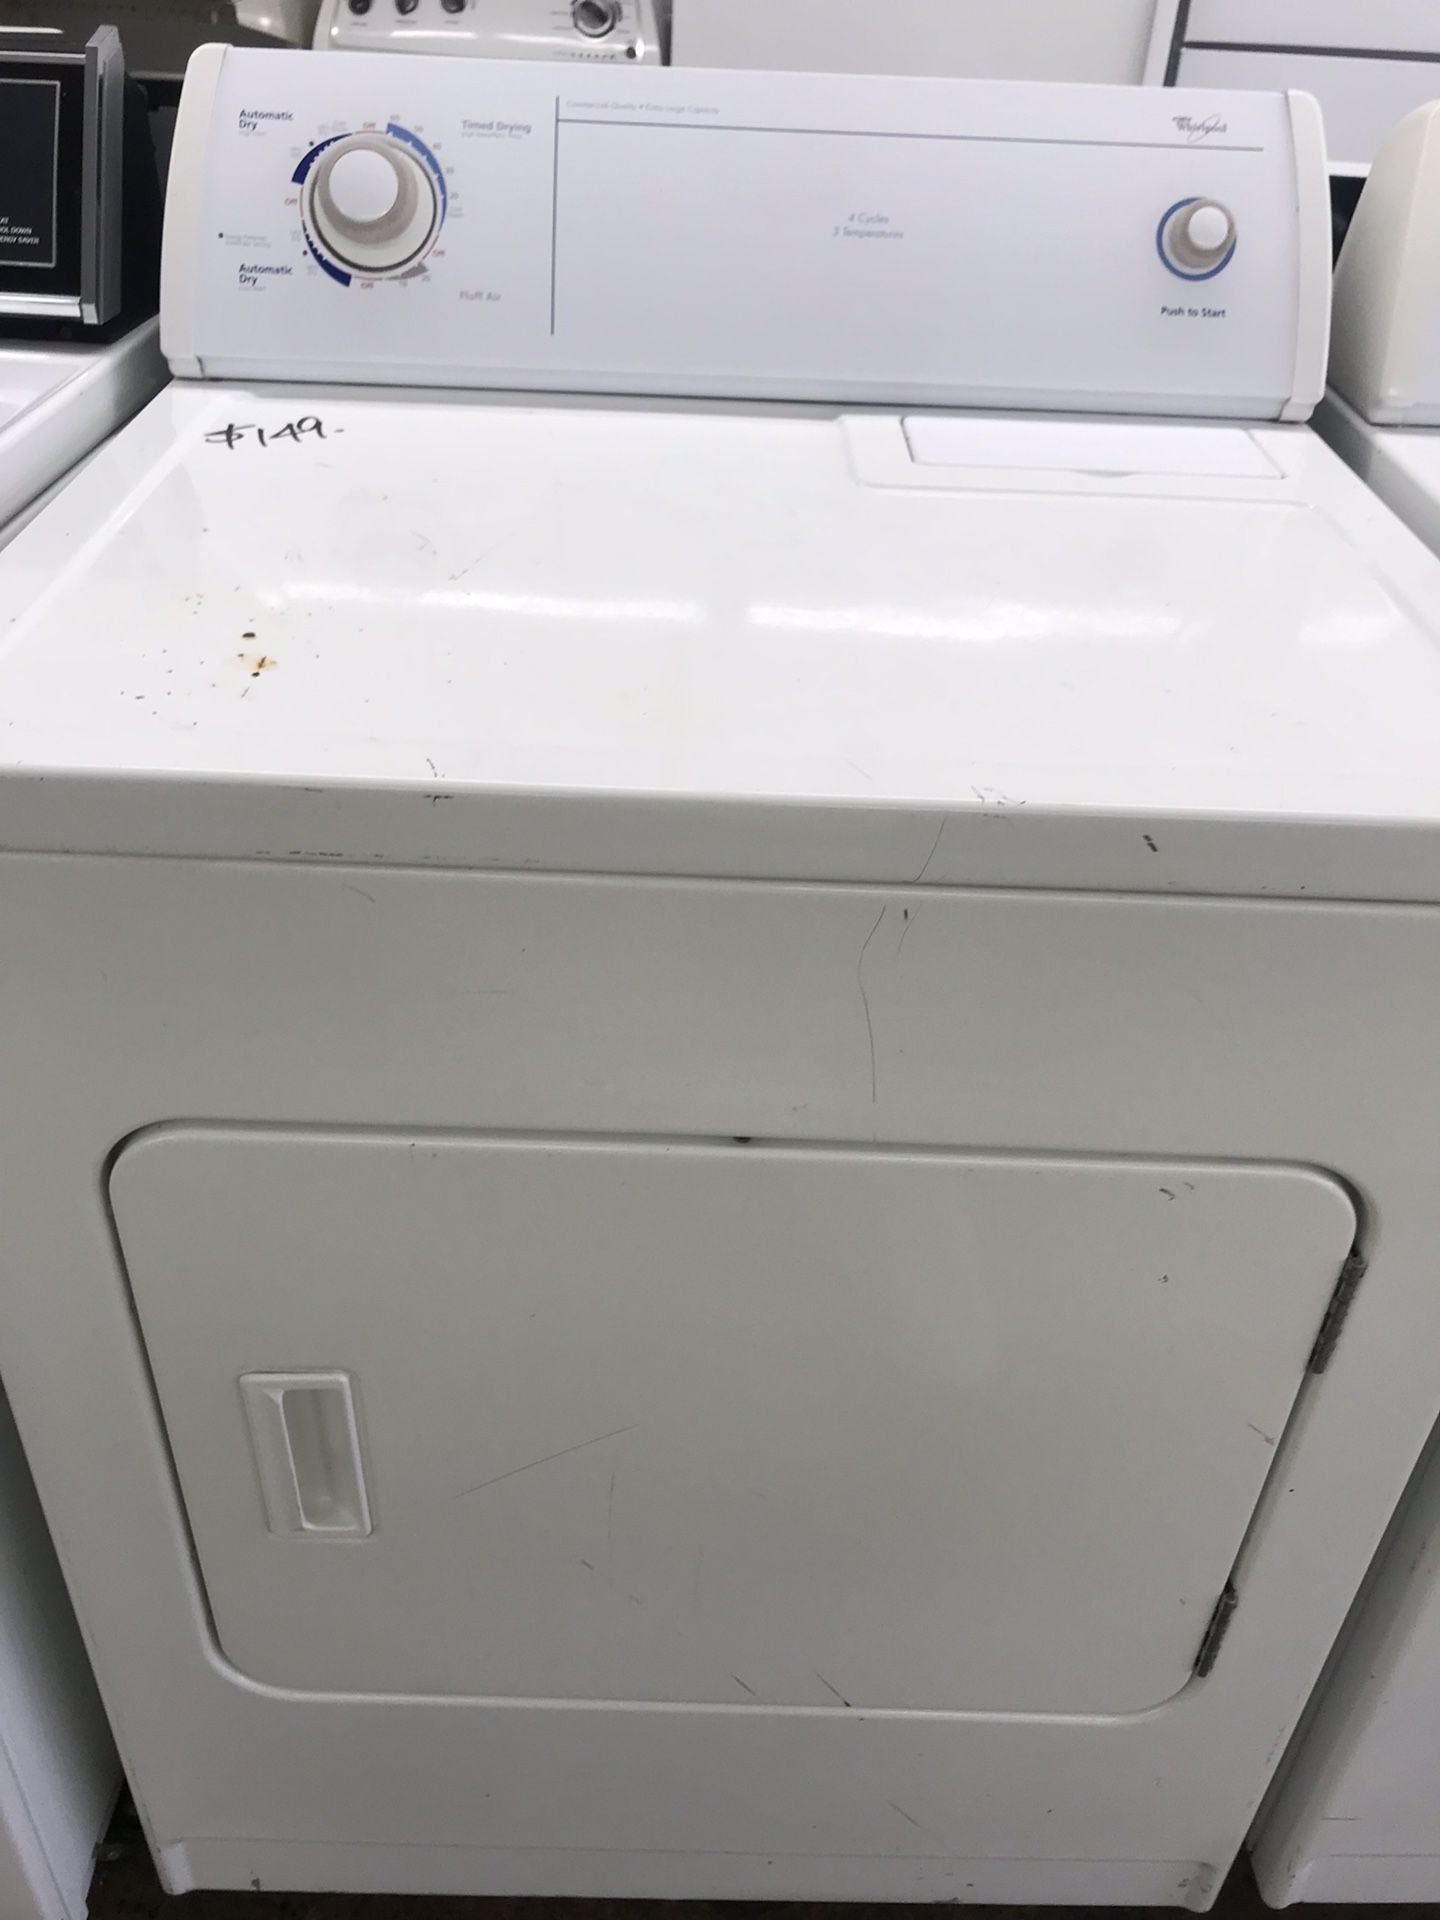 Whirlpool Commercial Quality Electric Dryer - HEAVY DUTY! LARGE CAPACITY! 100% Refurbished & Guaranteed for 30 Days!